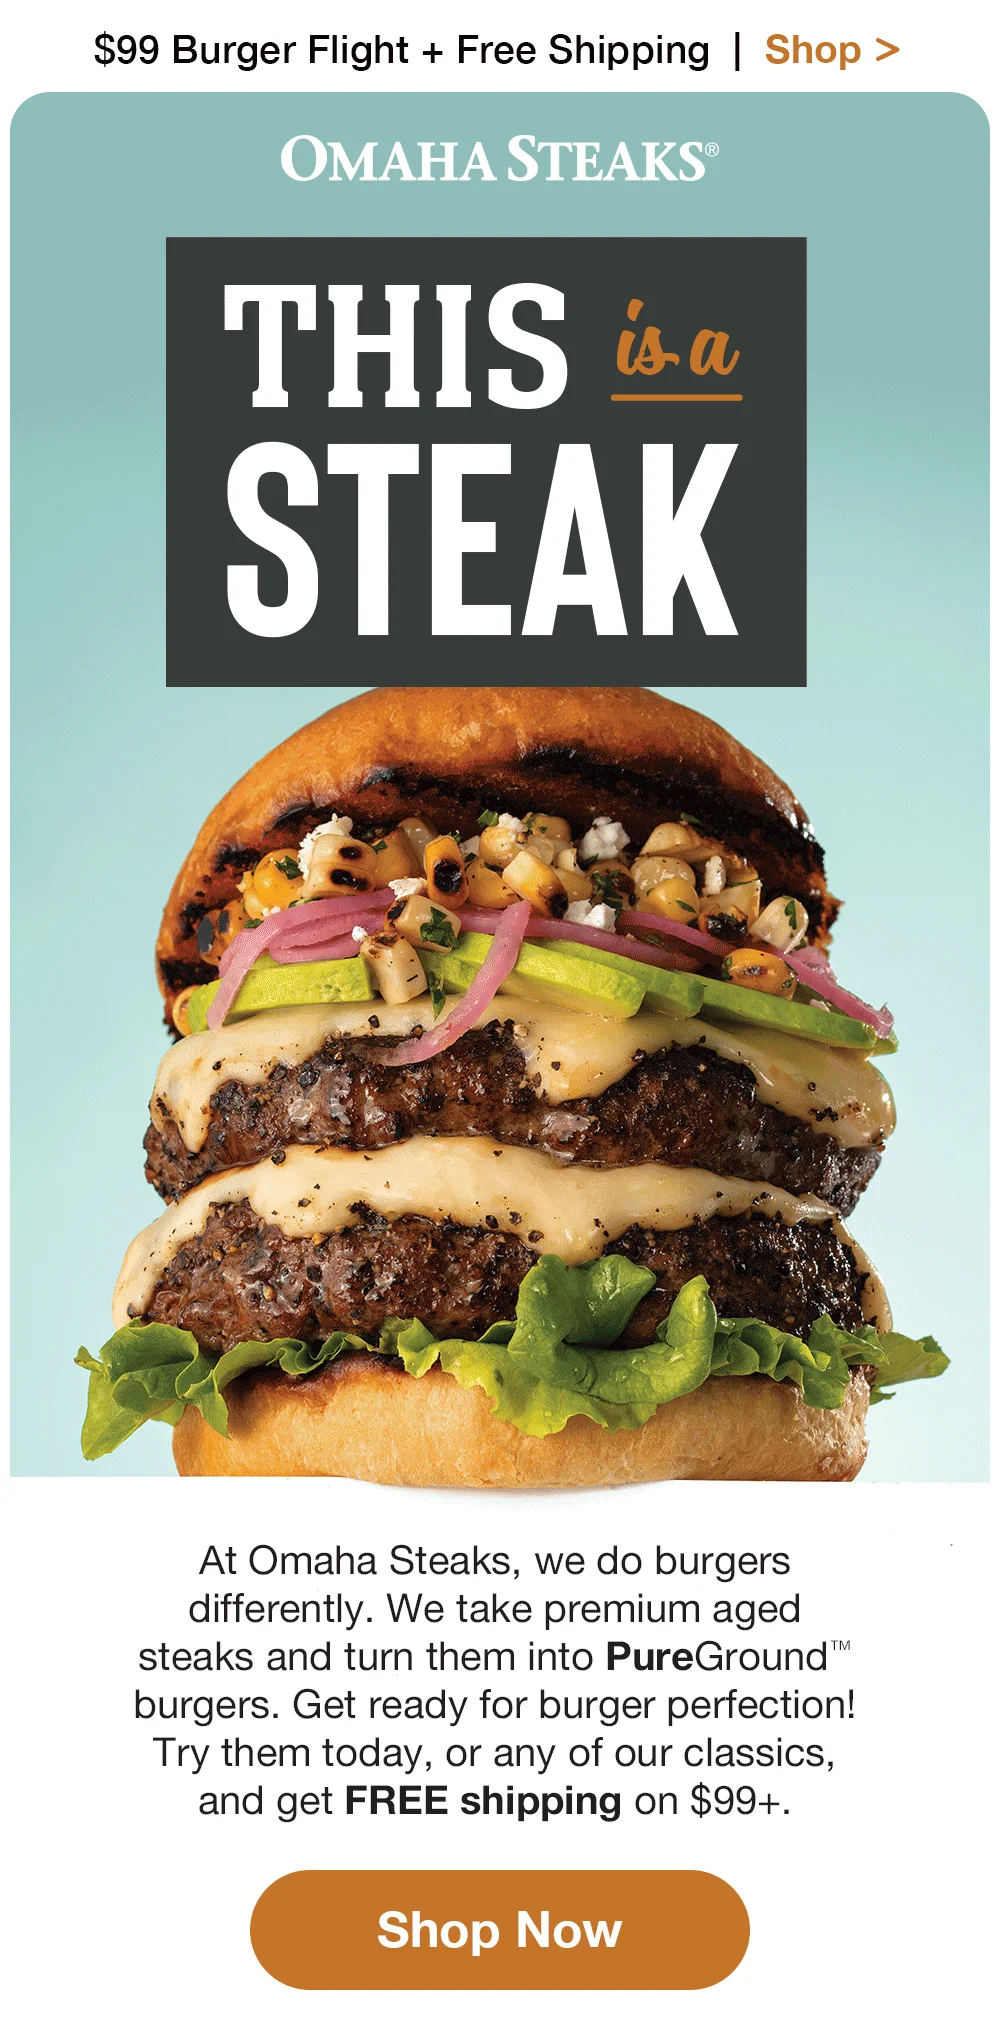 \\$99 Burger Flight + Free Shipping | Shop > | OMAHA STEAKS® THIS isa STEAK At Omaha Steaks, we do burgers differently. We take premium aged steaks and turn them into PureGround™ burgers. Get ready for burger perfection! Try them today, or any of our classics, and get FREE shipping on \\$99+. || Shop Now